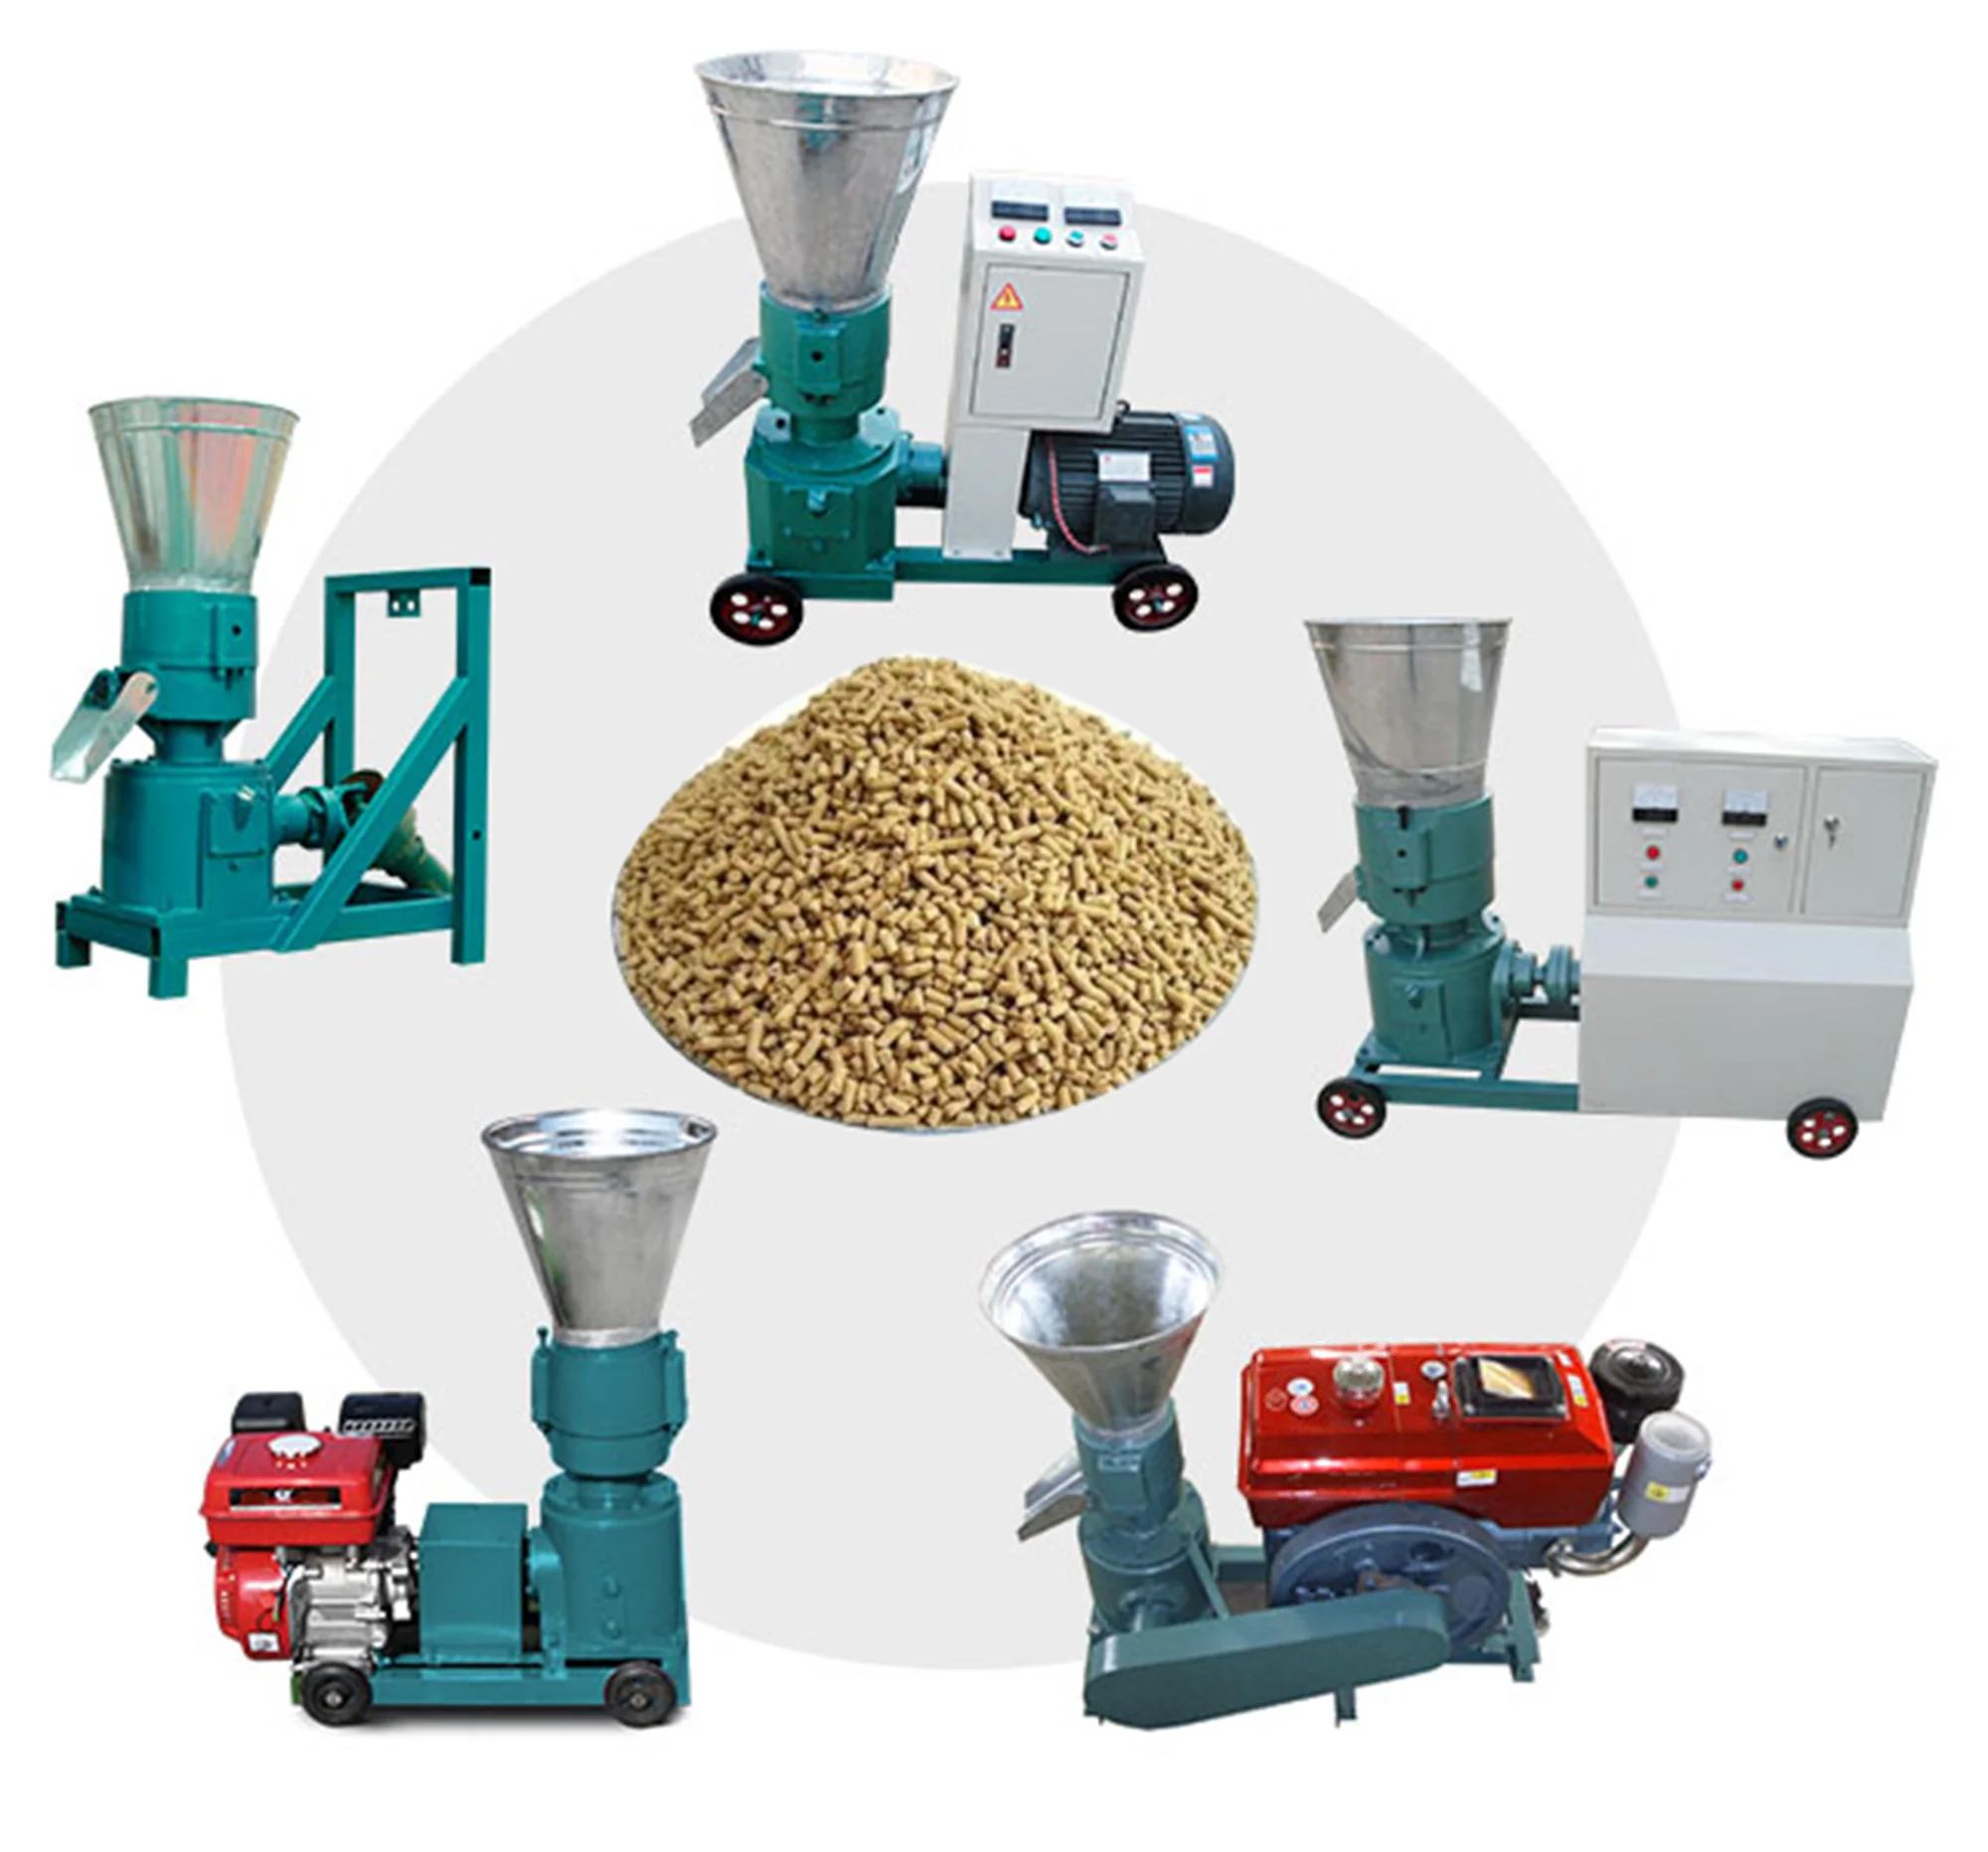 milling machine power live stock chicken feed packaging crumble